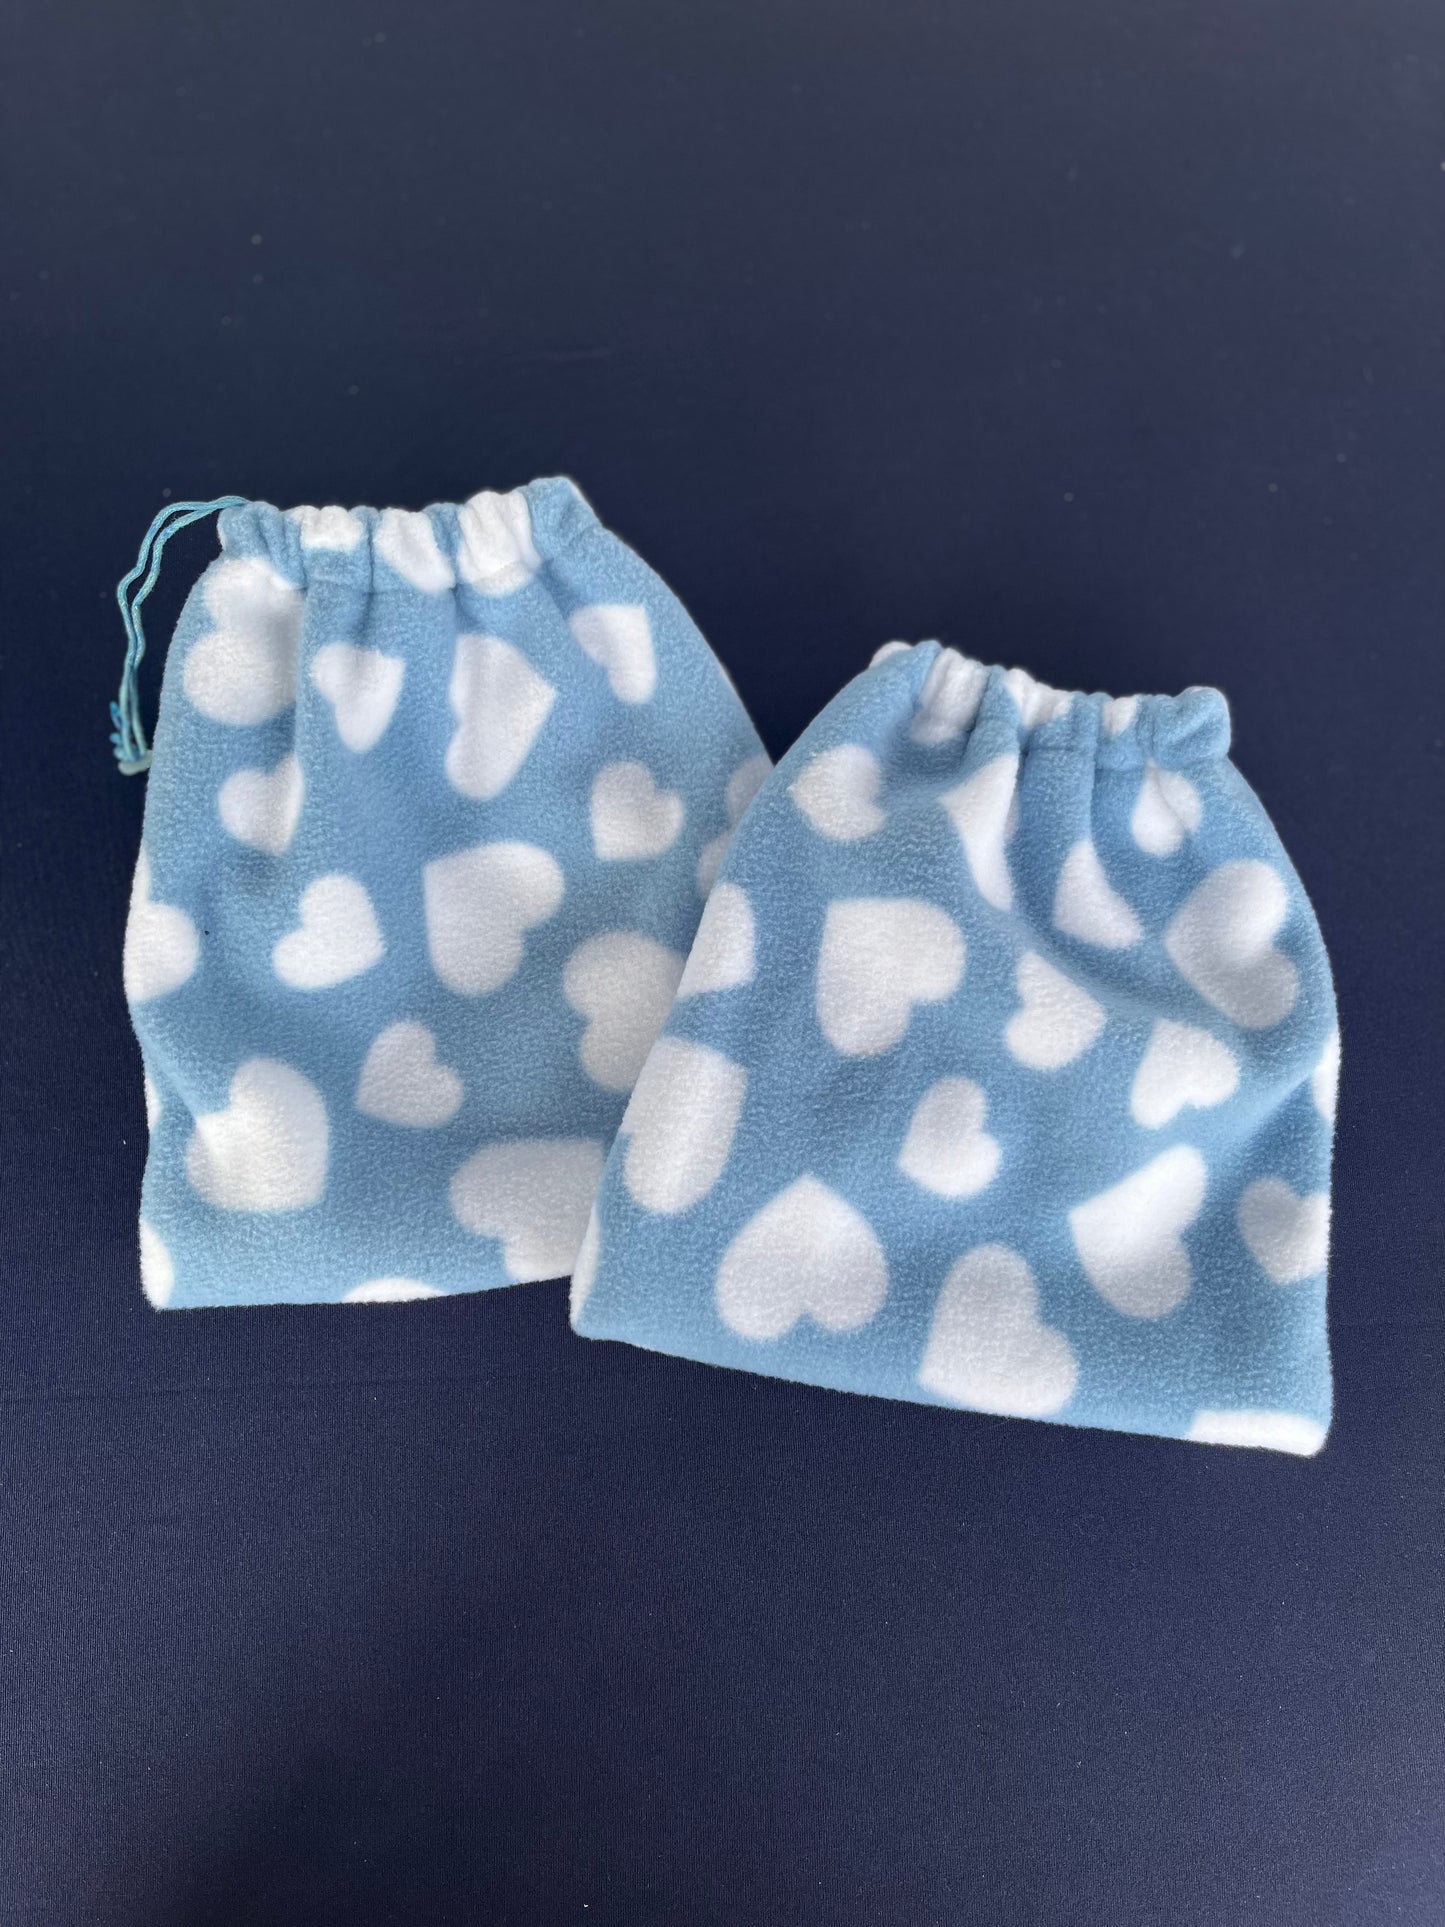 Blue stirrup covers with white hearts on